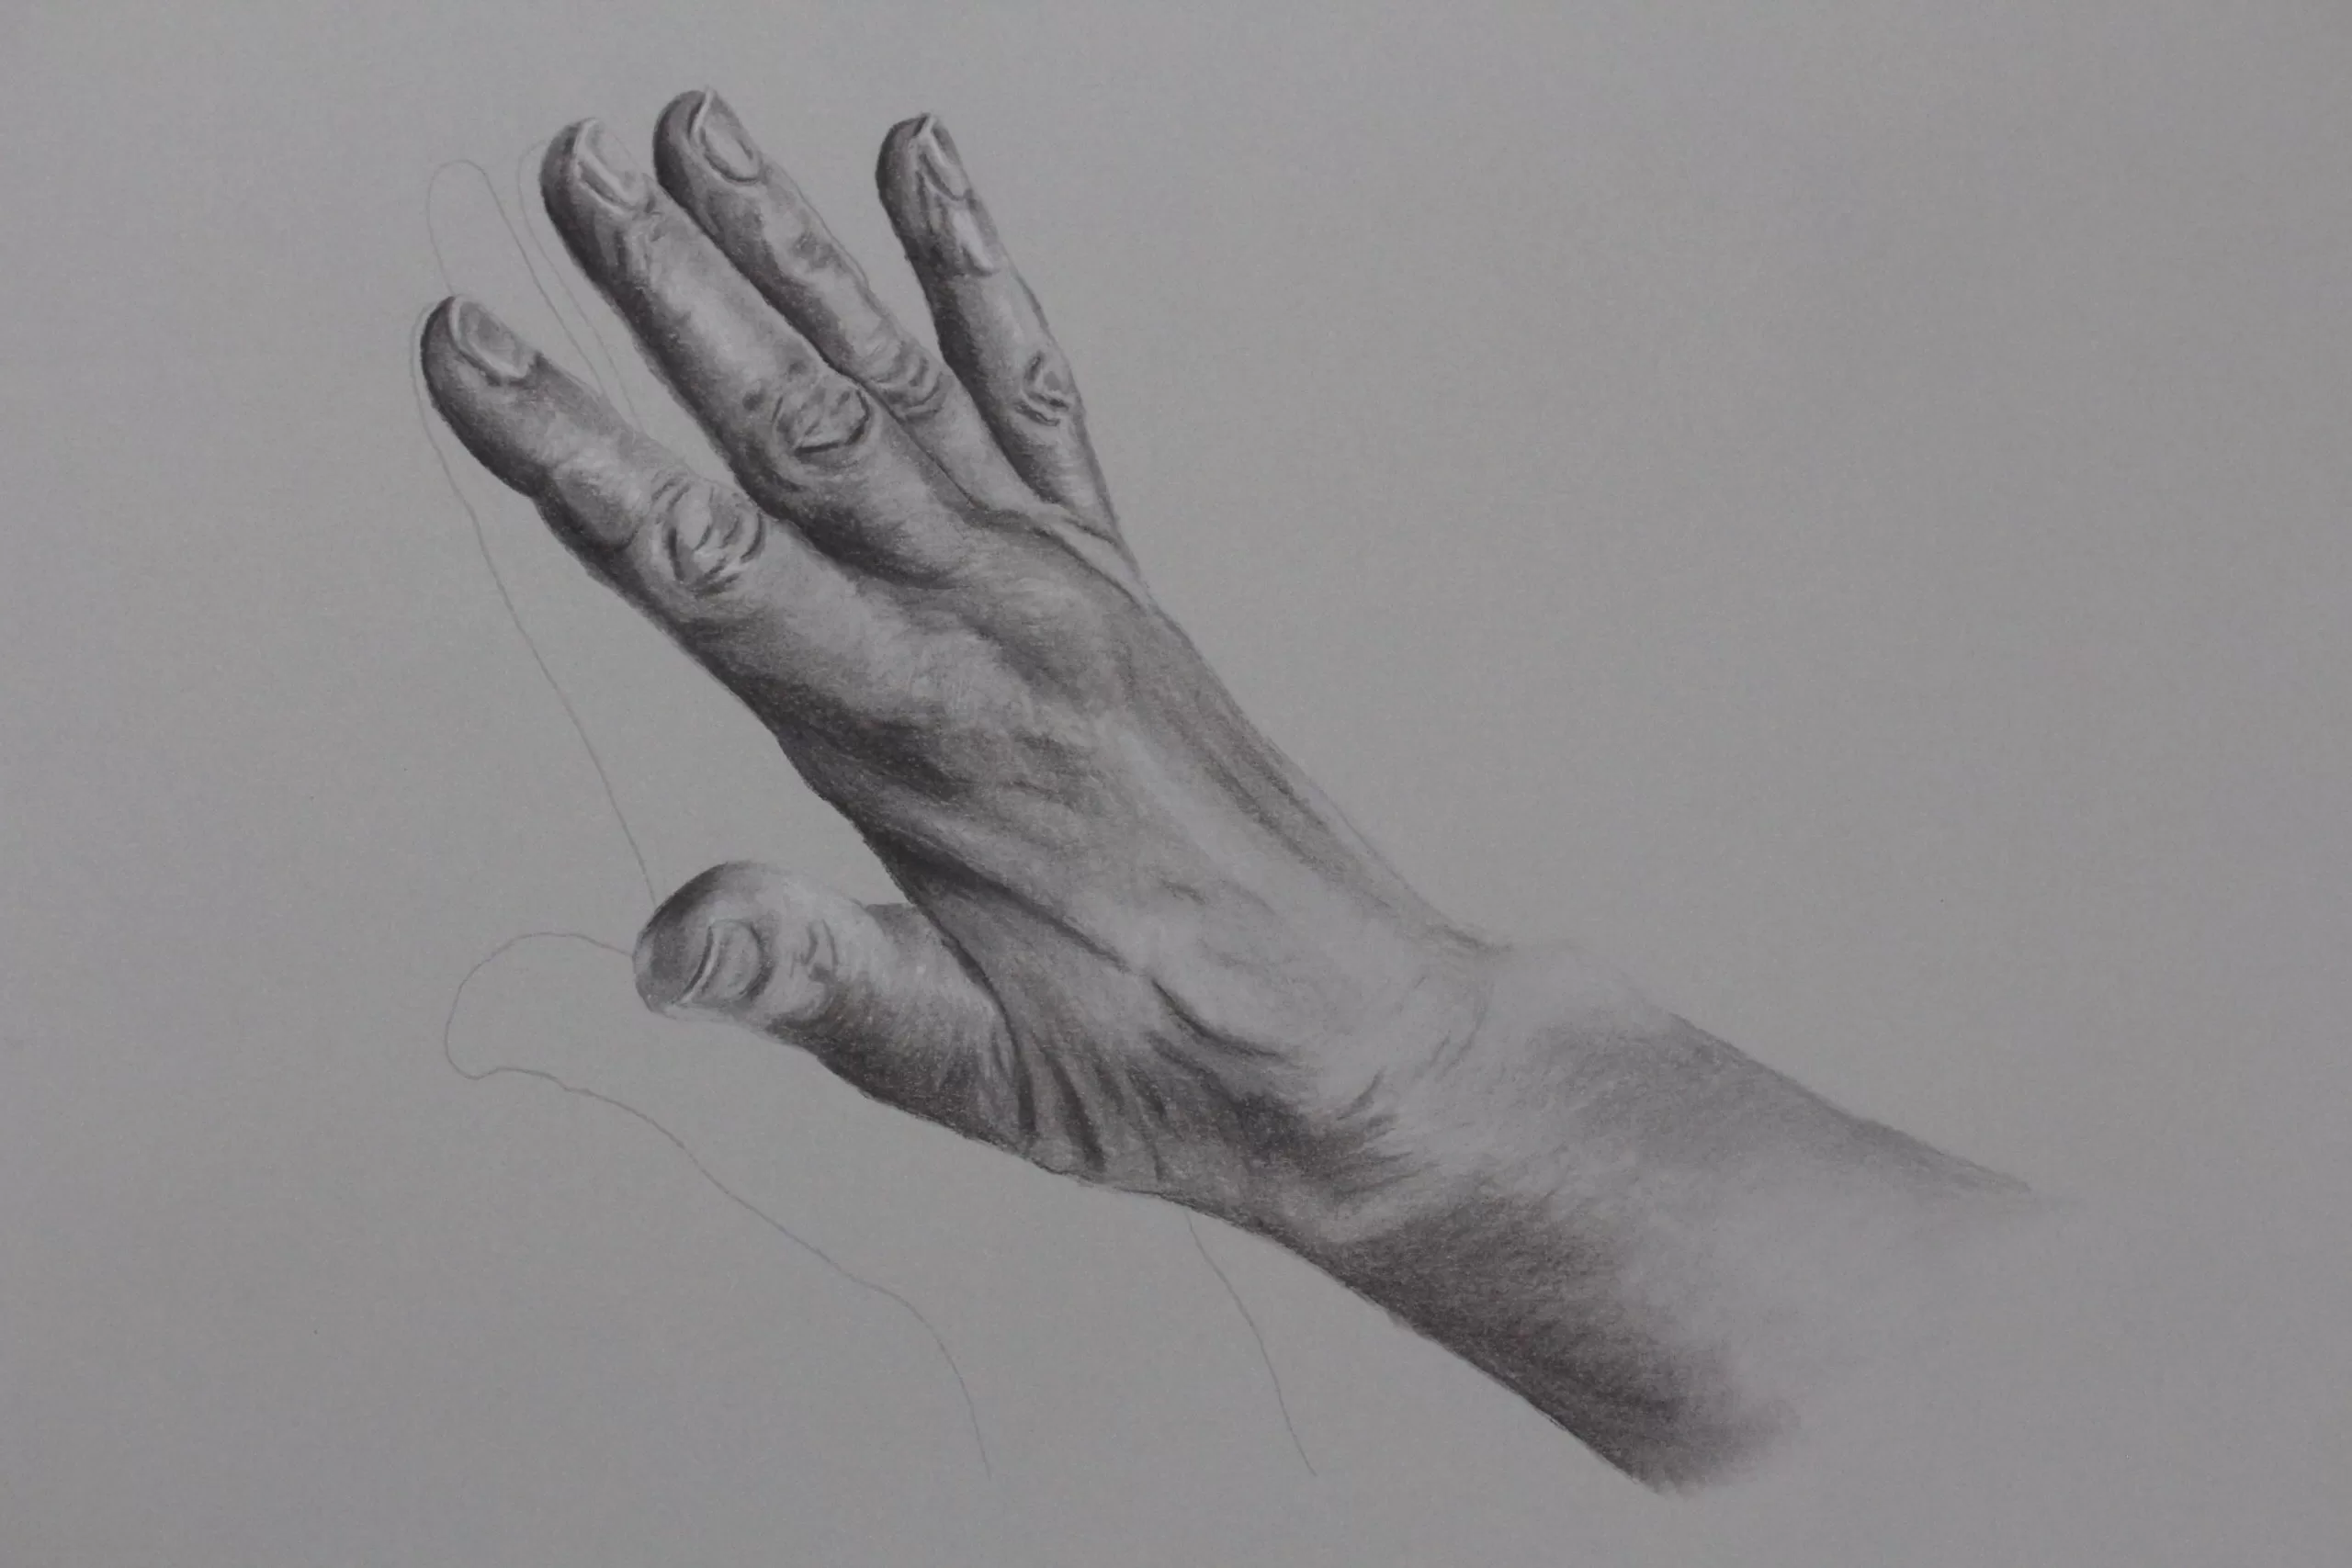 Pencil drawing of hand touching an barely visible reflection by Abi Spendlove